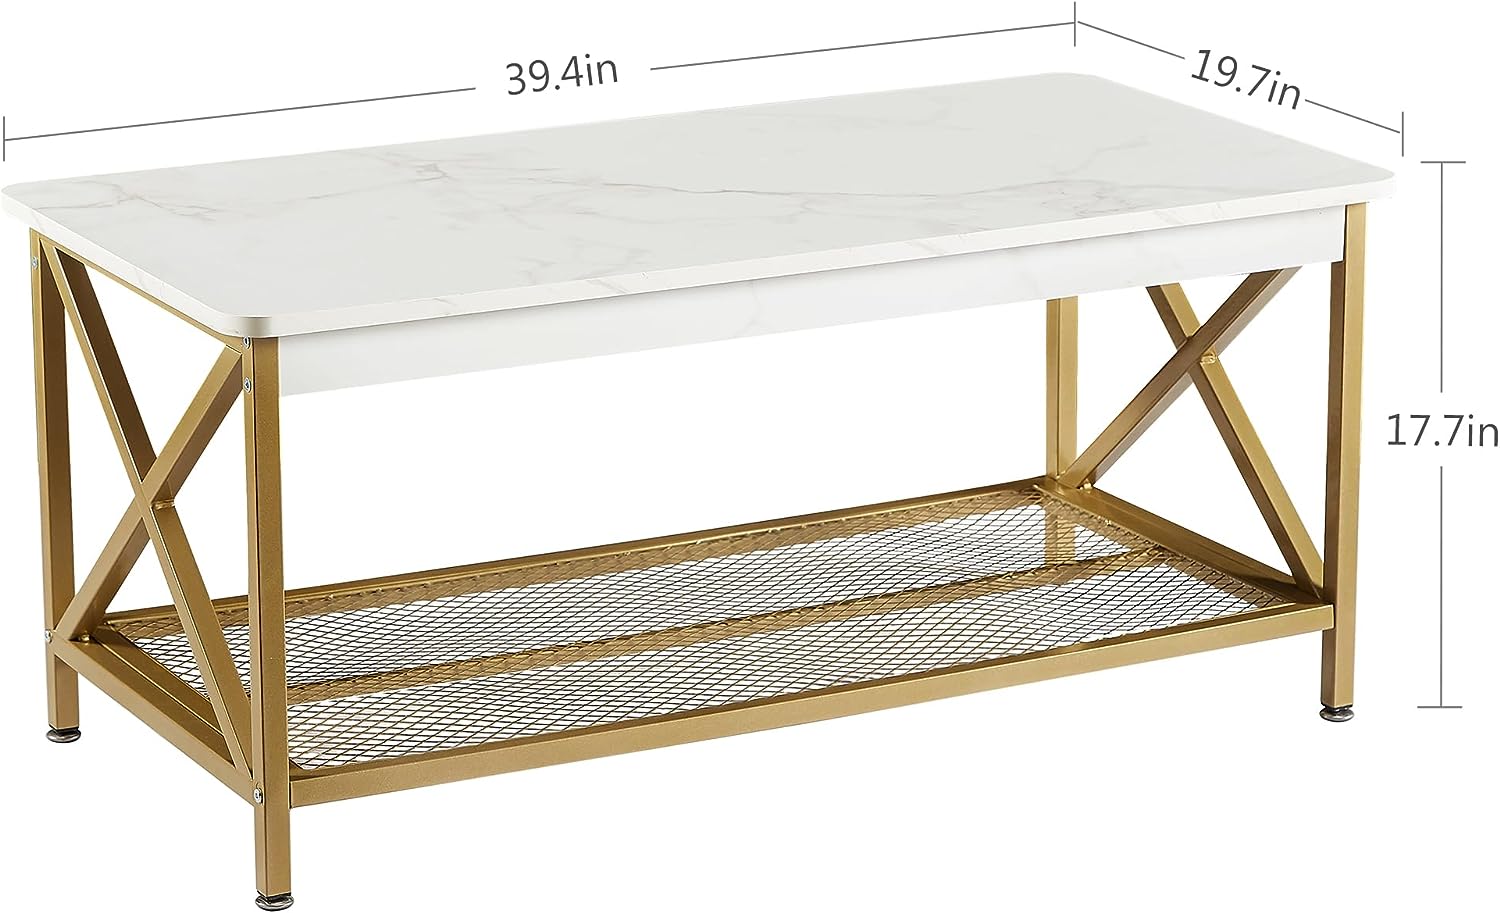 VECELO Coffee Table with Storage Shelf for Living Room 39.4 Inch, Simple Modern & Industrial Design